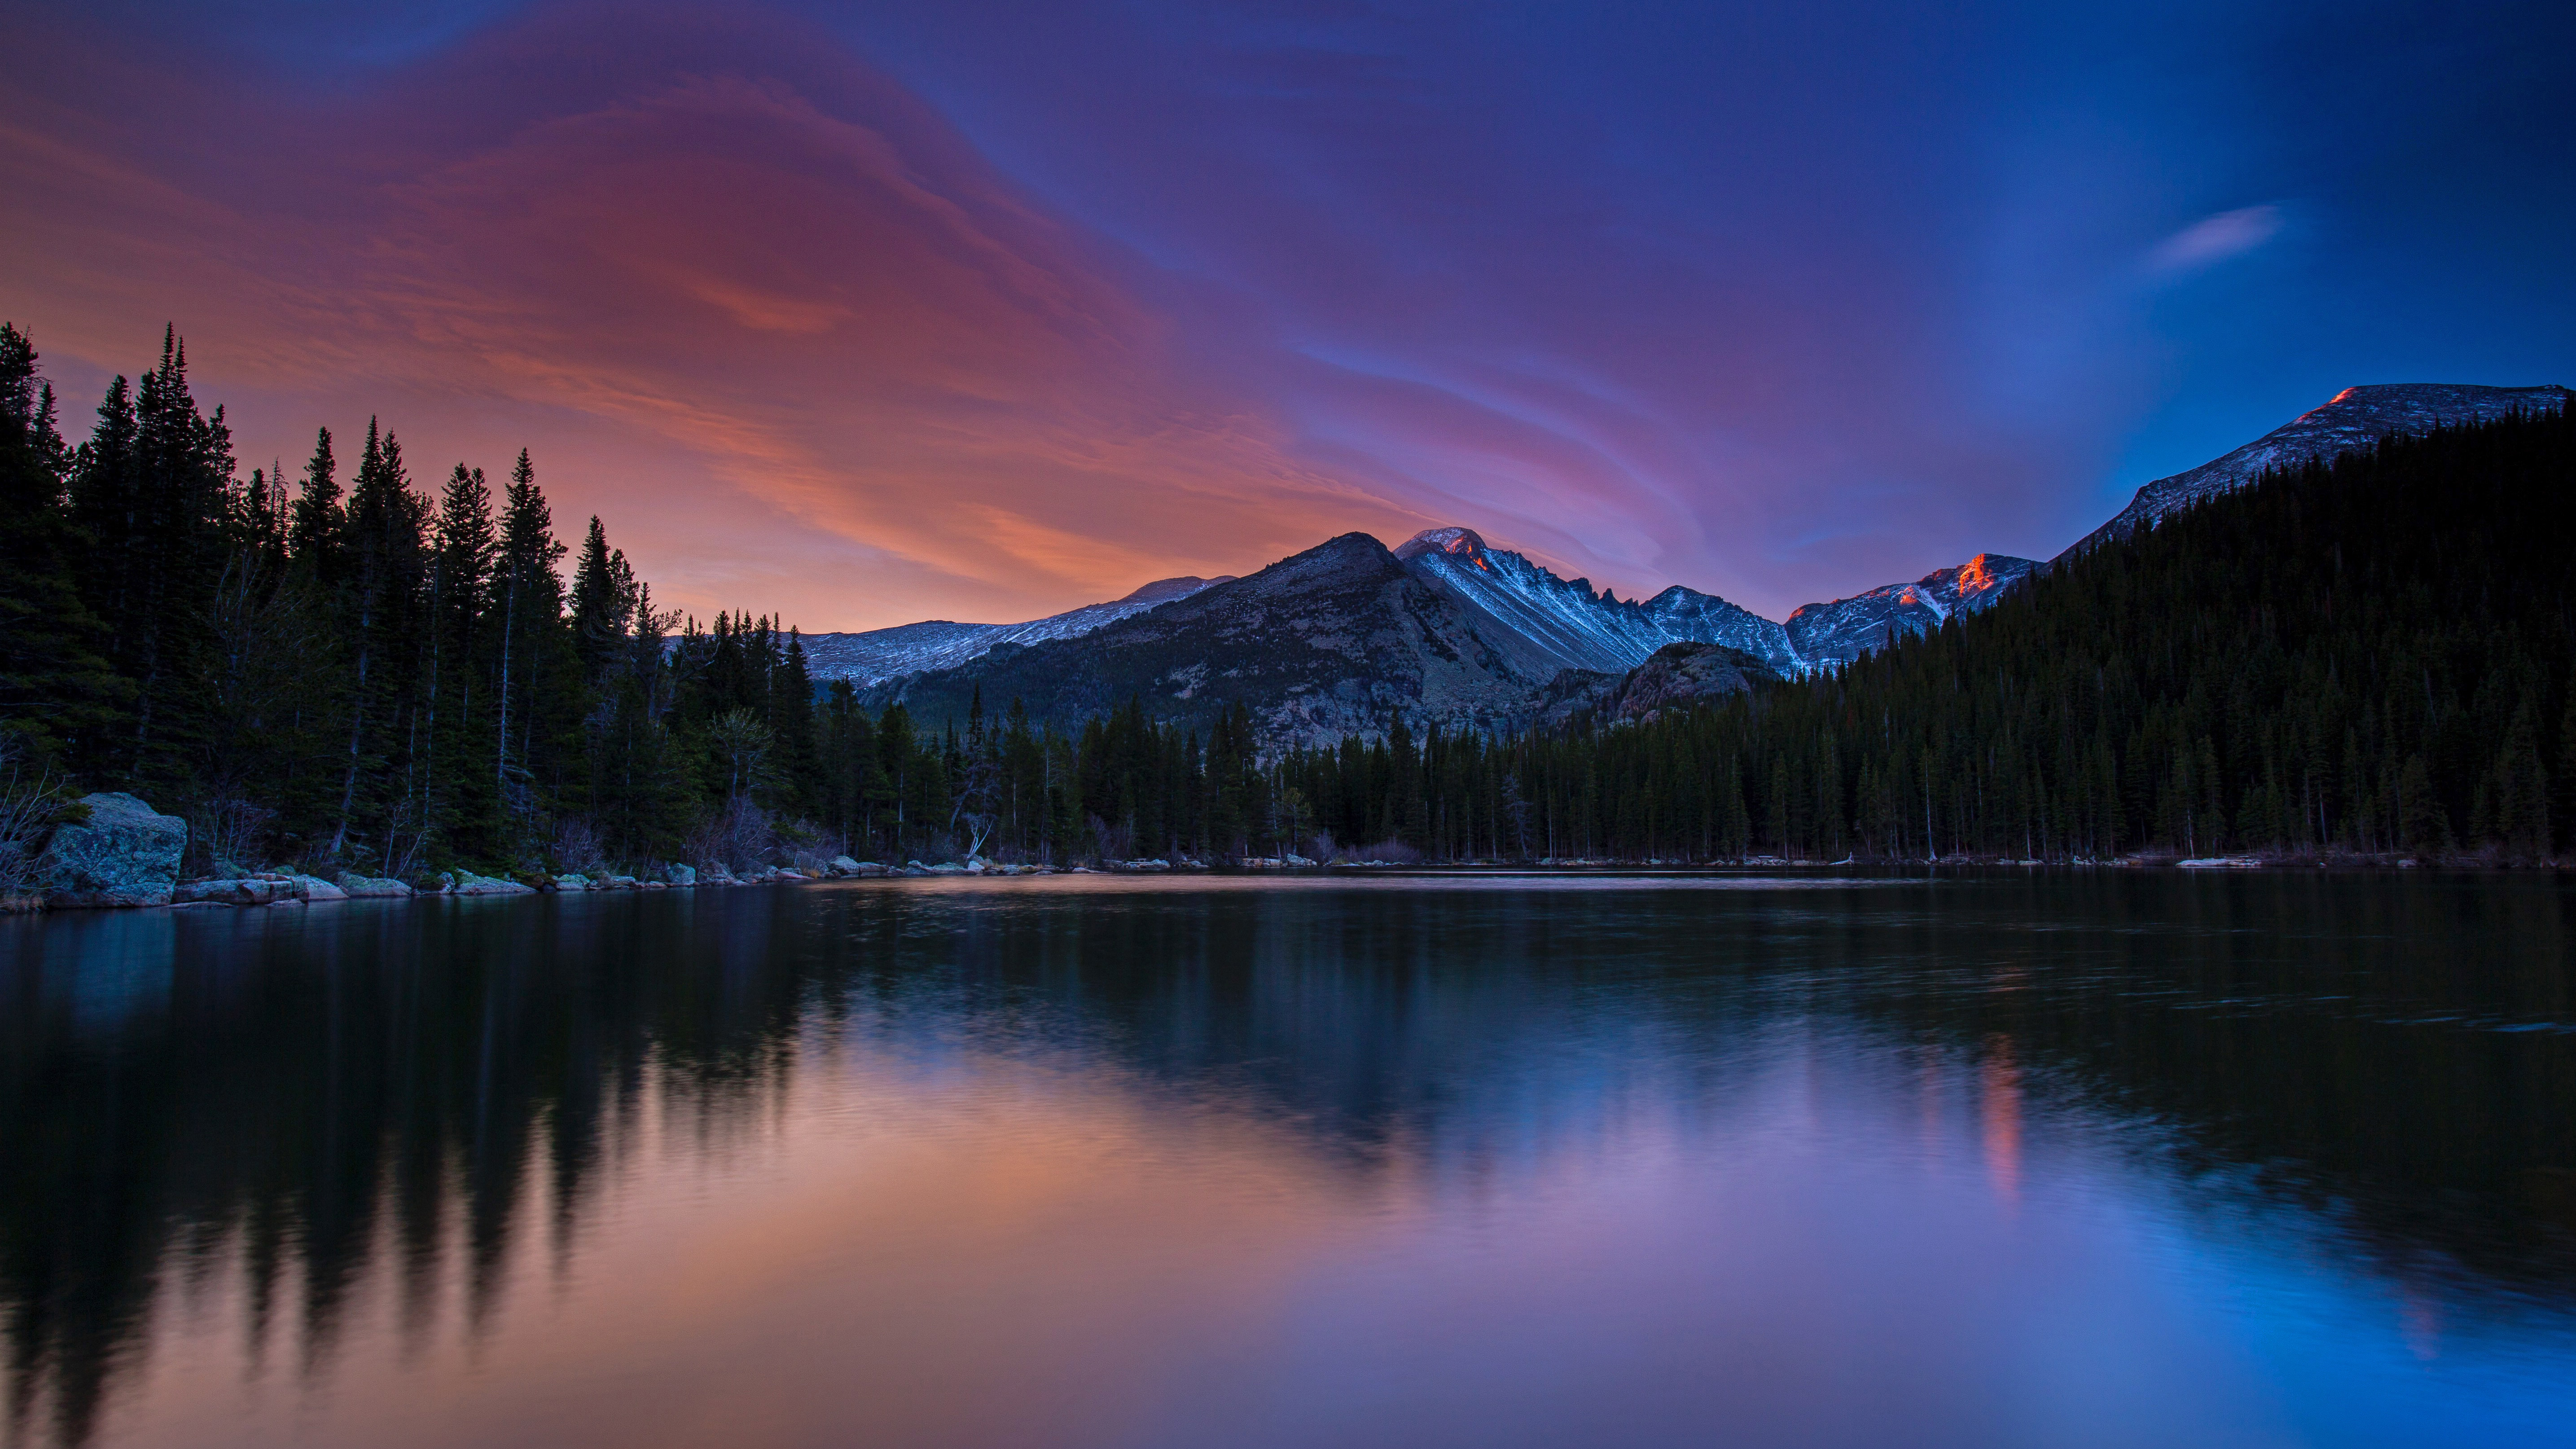 Sunset over the Rocky Mountains by Andrew R. Slaton